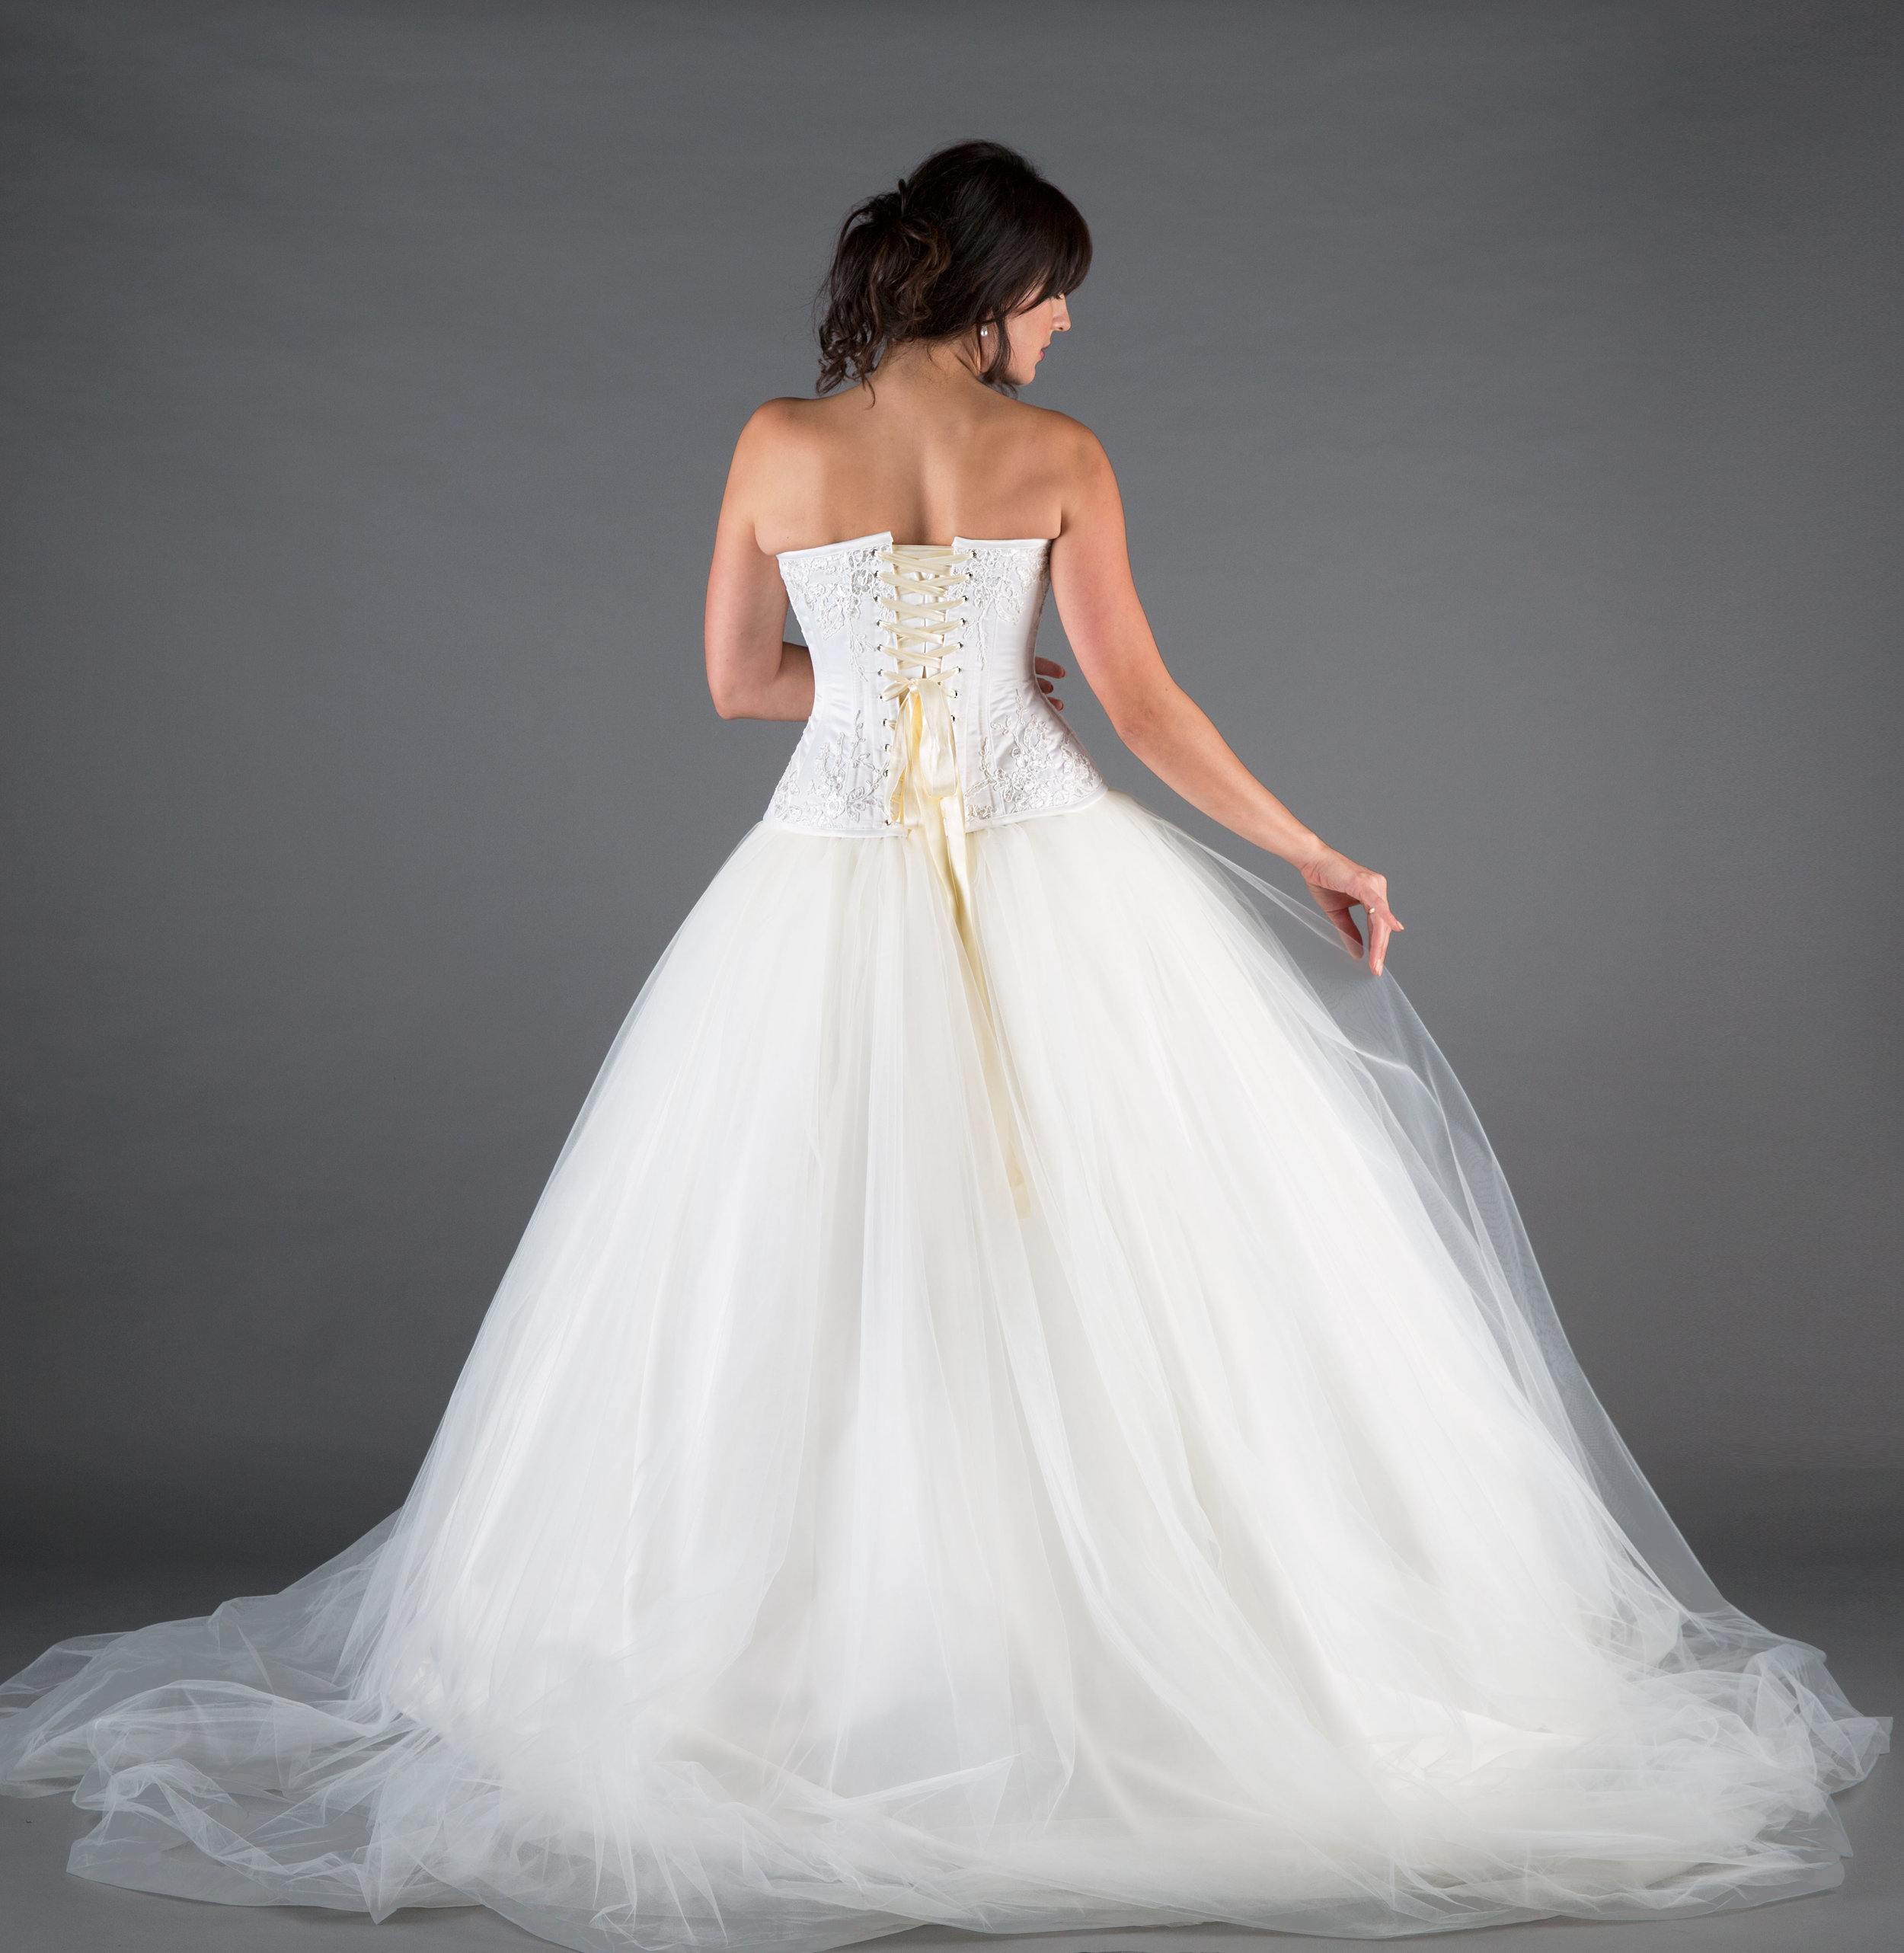 The Strapless Wedding Dresses You Need to See